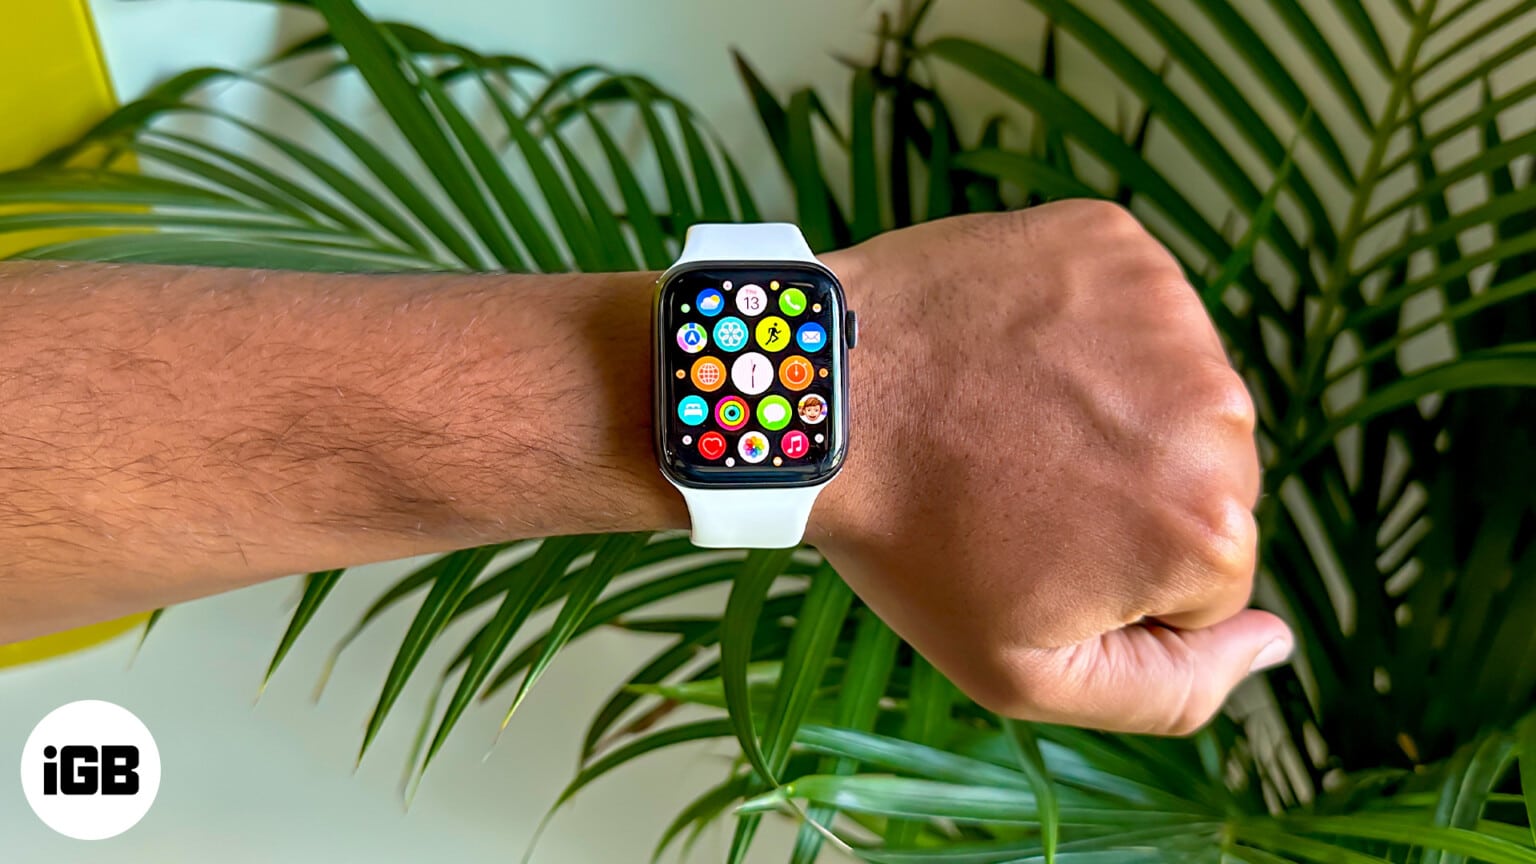 How to set up Apple Watch for left handed use